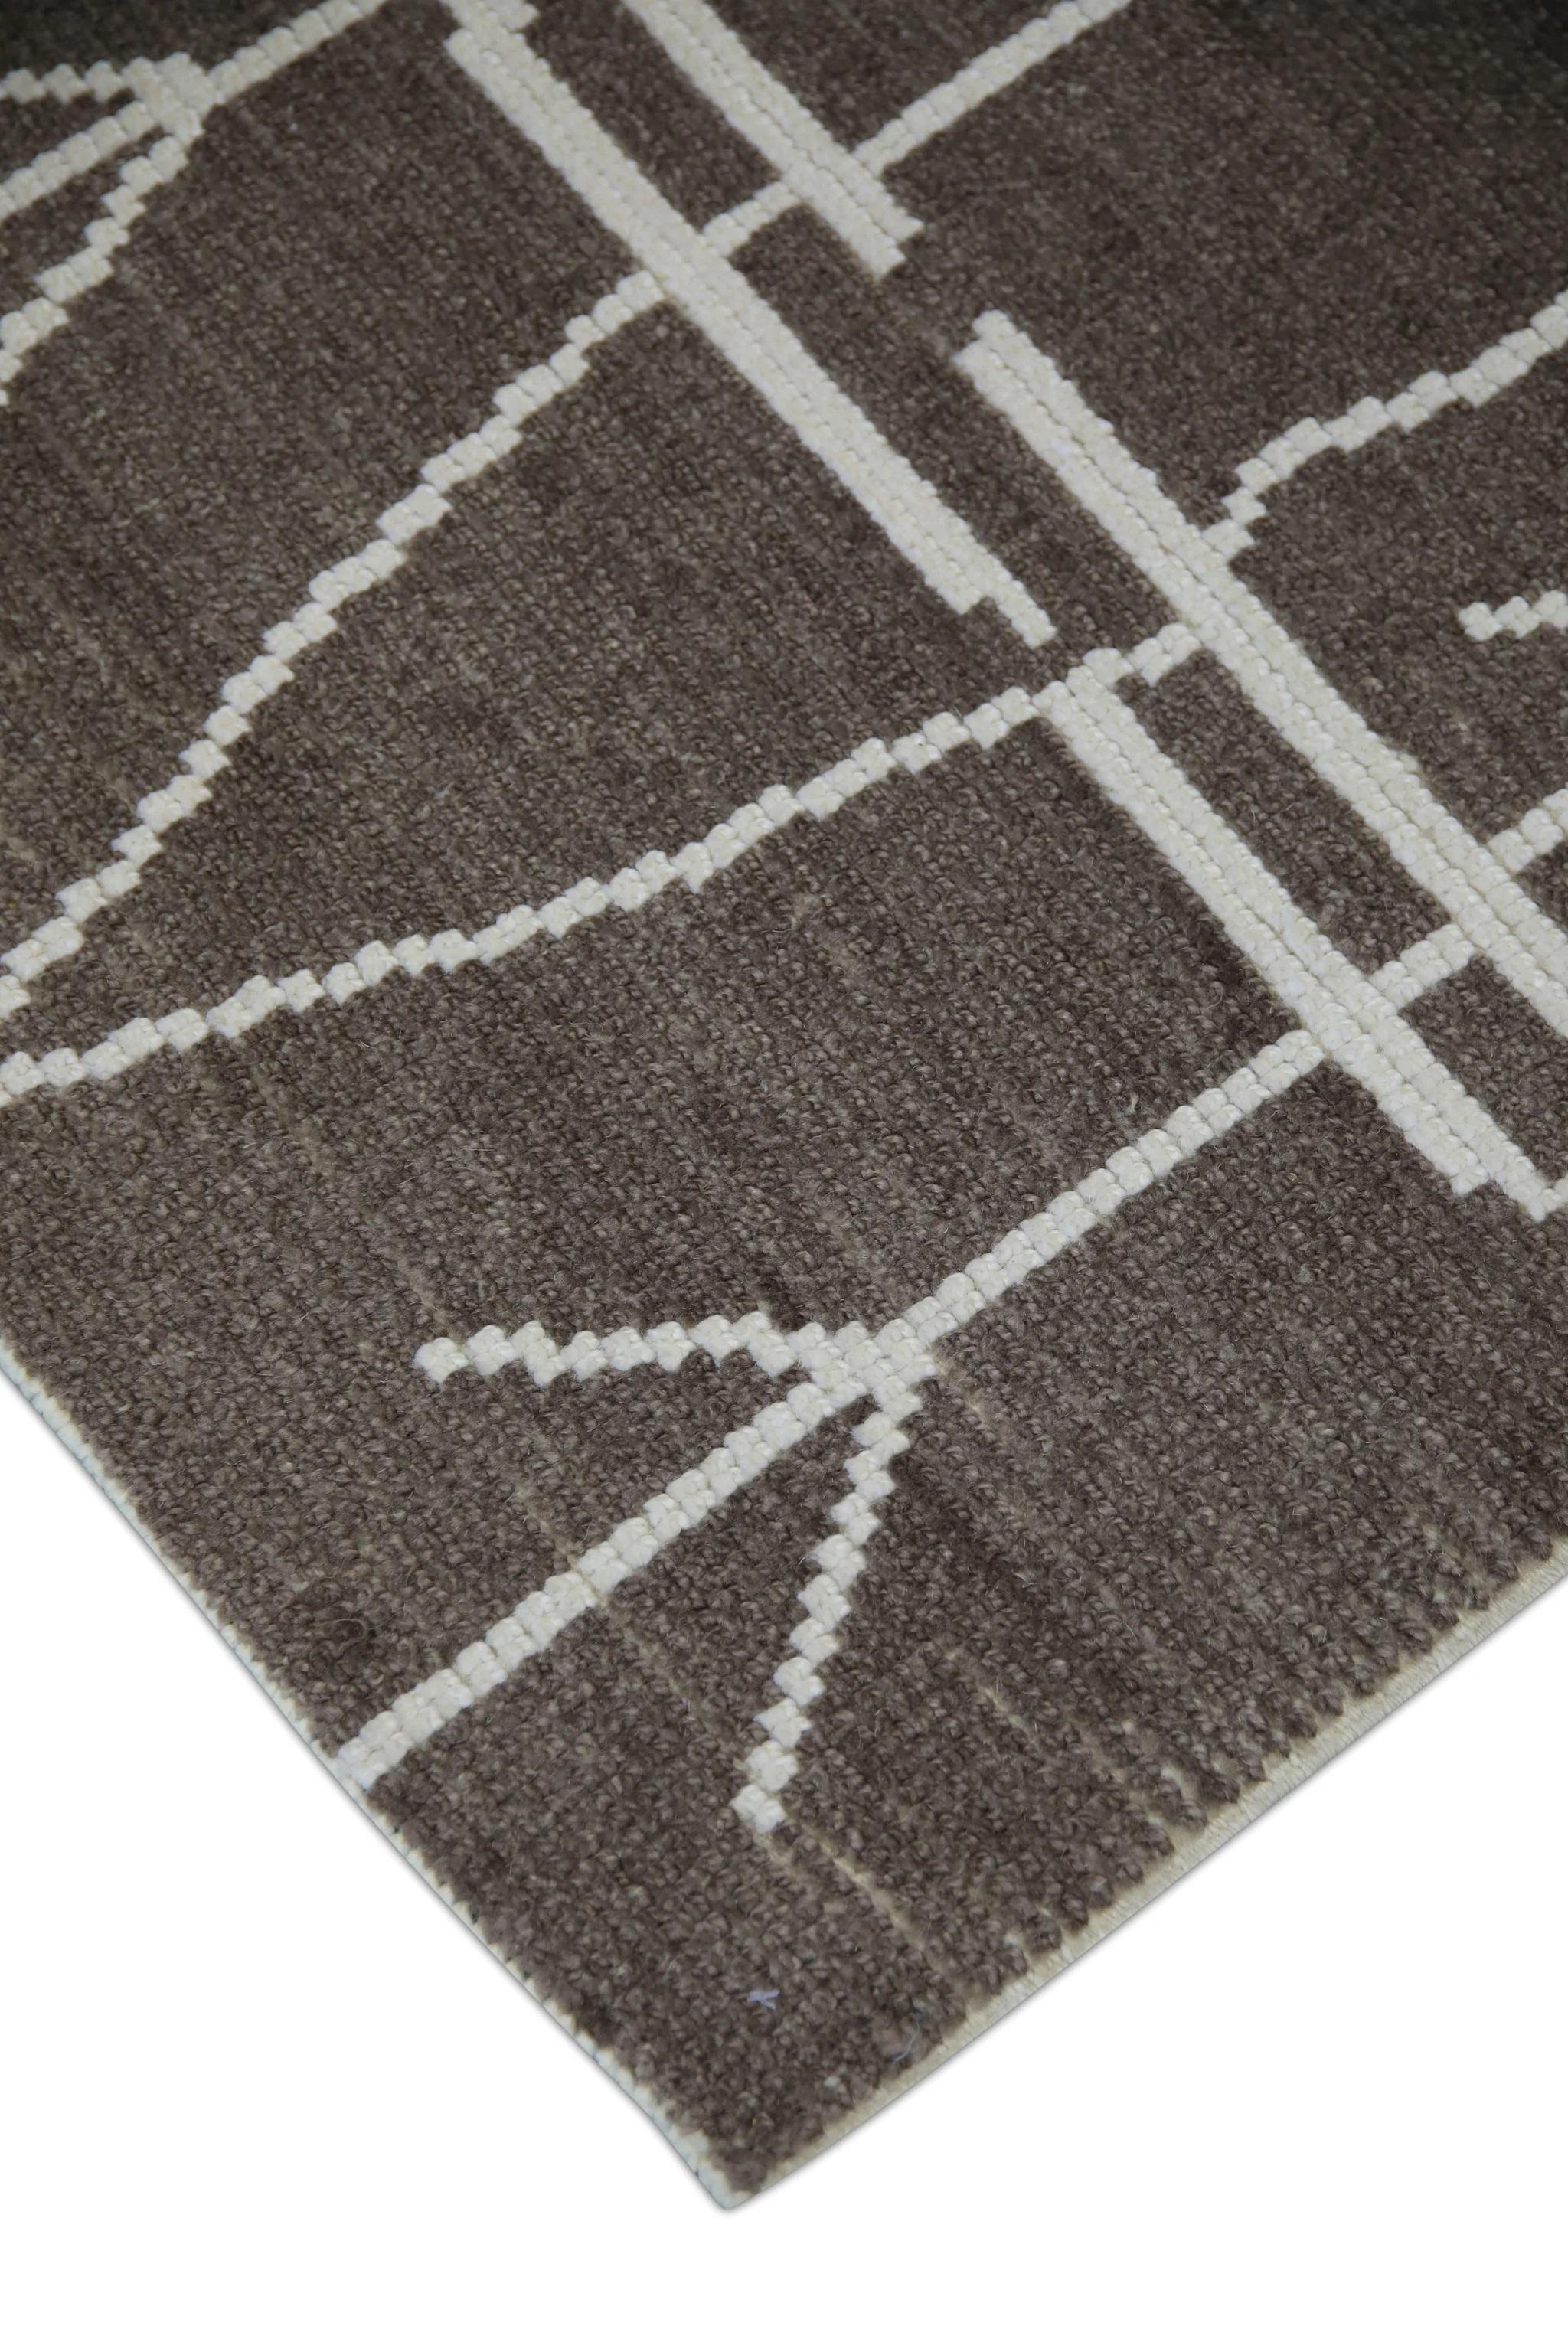 A stunning modern Turkish tulu rug that is sure to add a touch of warmth and luxury to any space. This rug has been meticulously handwoven using traditional techniques, ensuring its quality and durability.

The rug is made with 100% natural